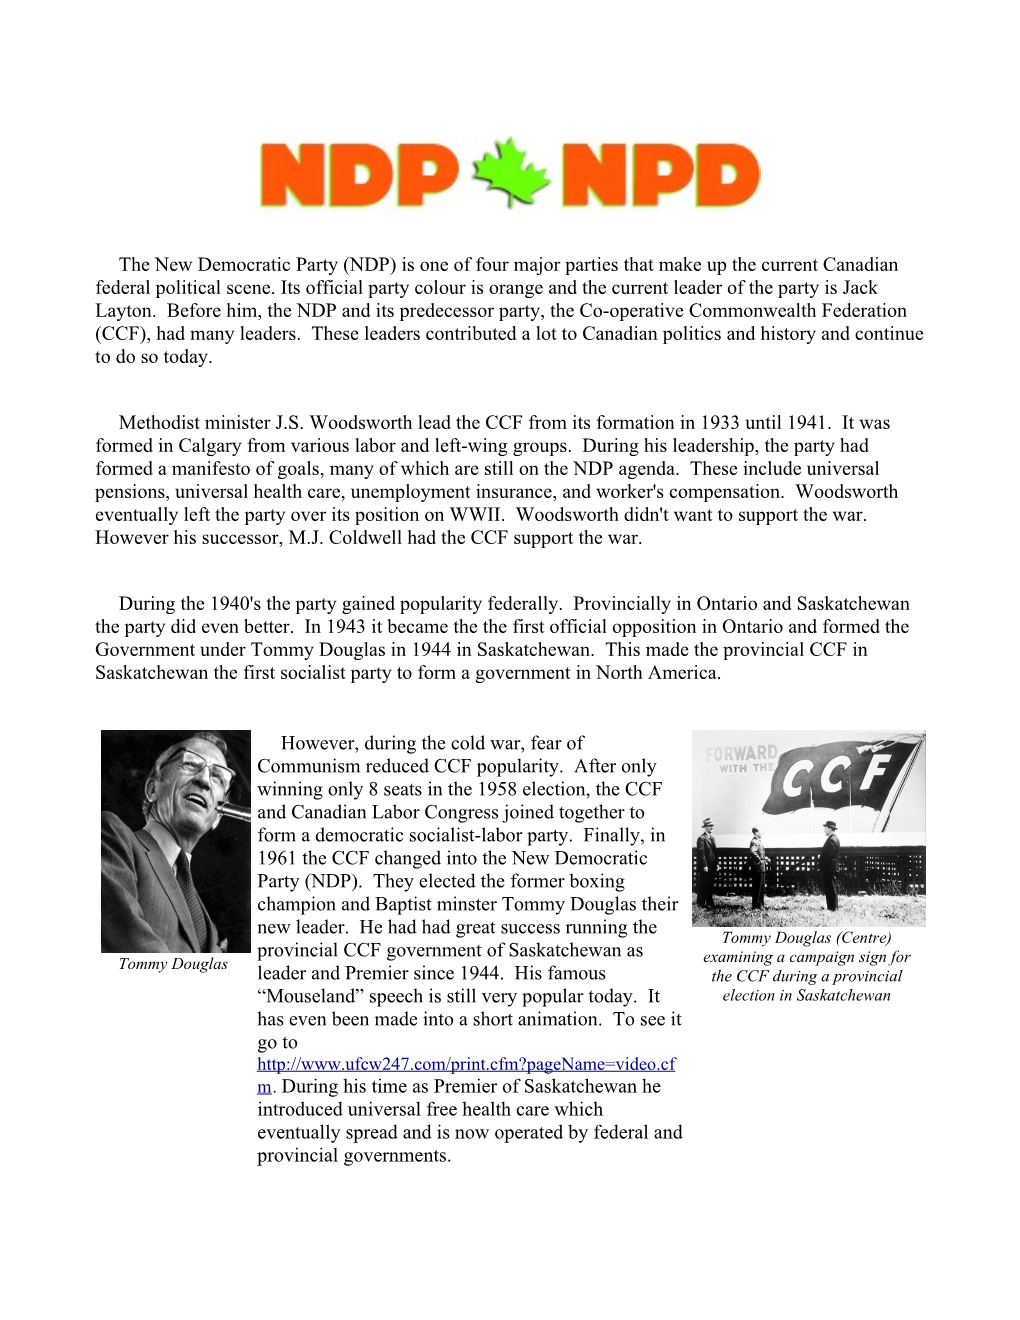 The New Democratic Party (NDP) Is One of Four Major Parties That Make up the Current Canadian Federal Political Scene